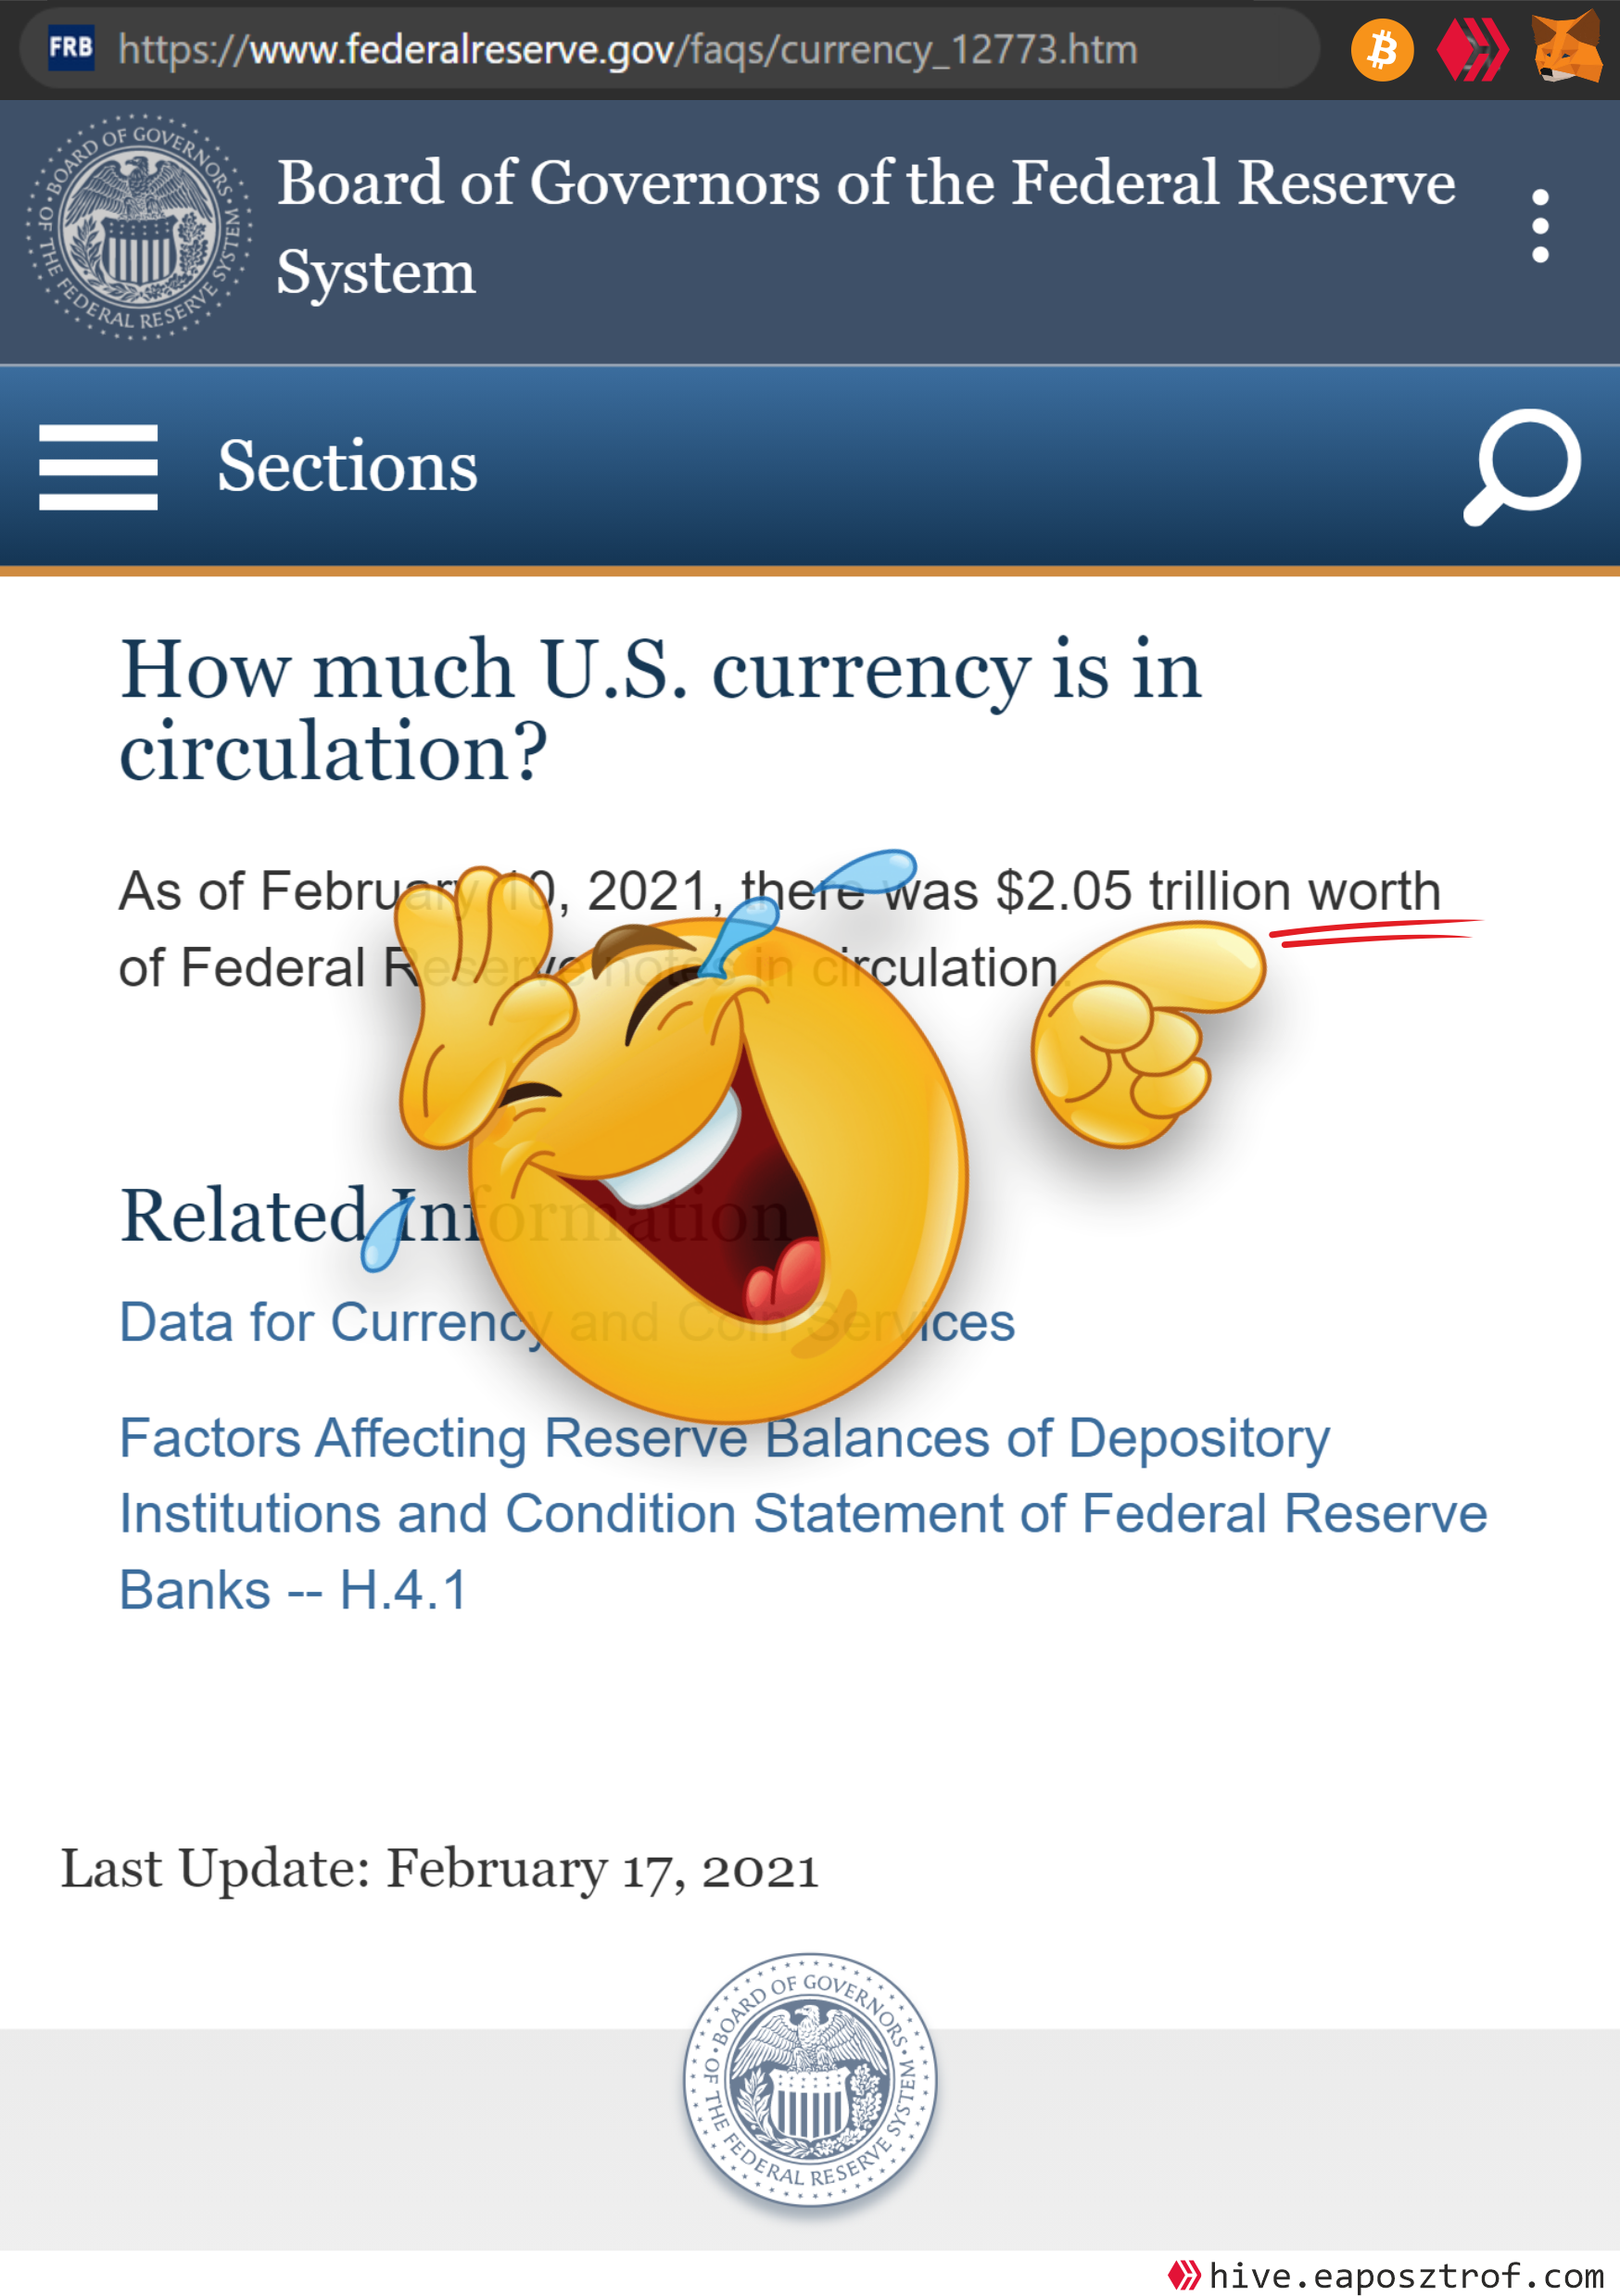 As of February 10, 2021, there was $2.05 trillion worth of Federal Reserve notes in circulation.